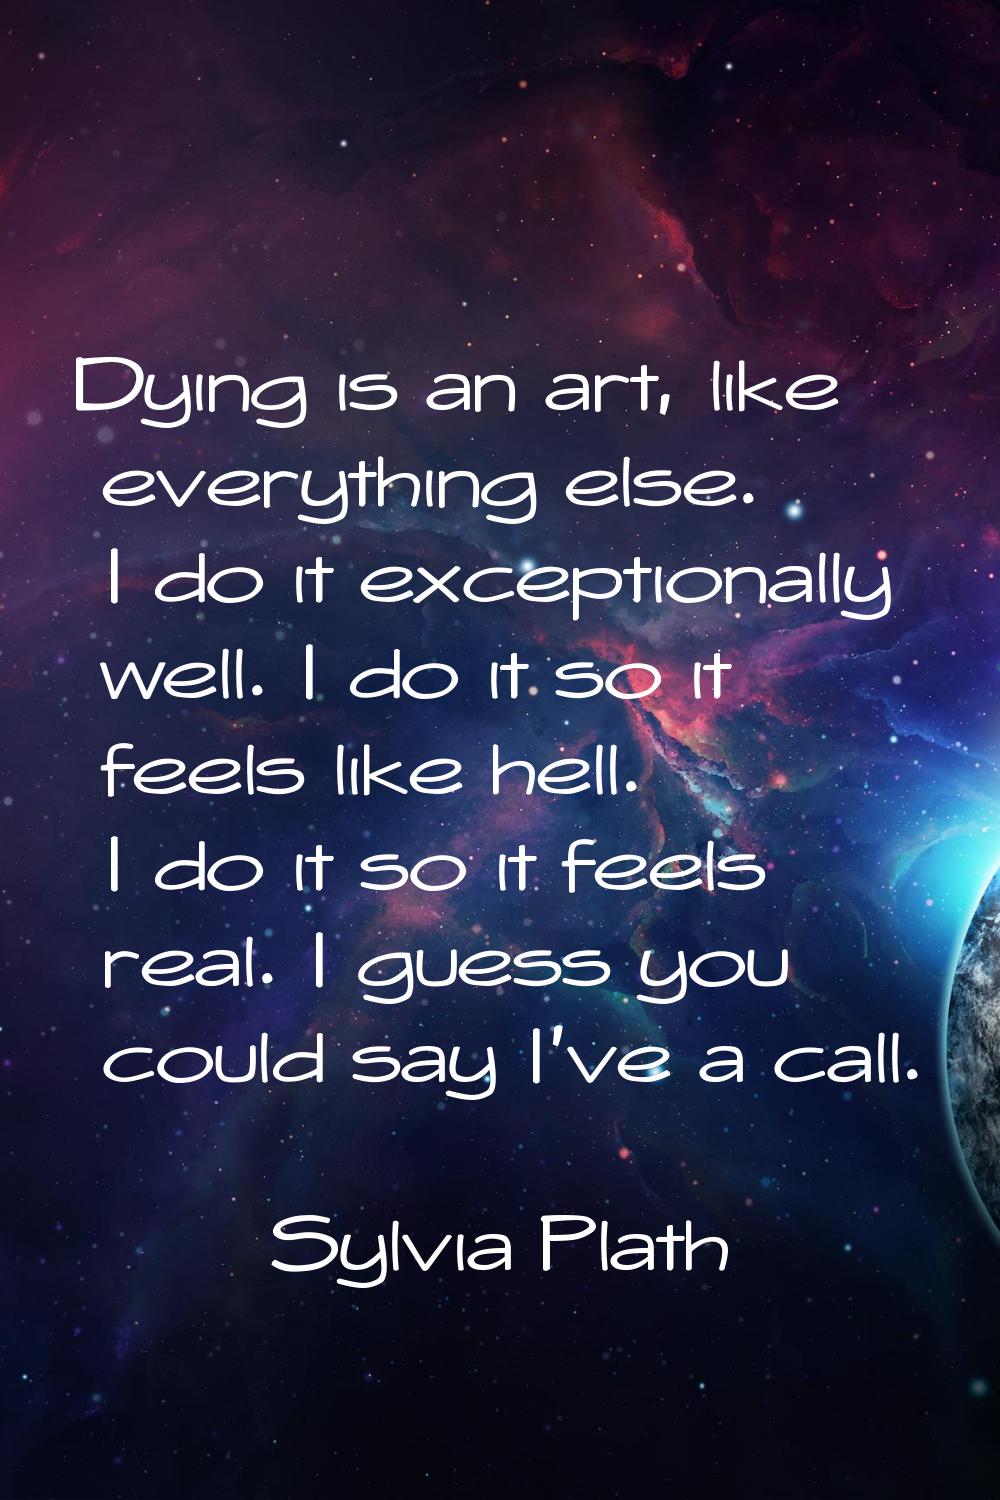 Dying is an art, like everything else. I do it exceptionally well. I do it so it feels like hell. I